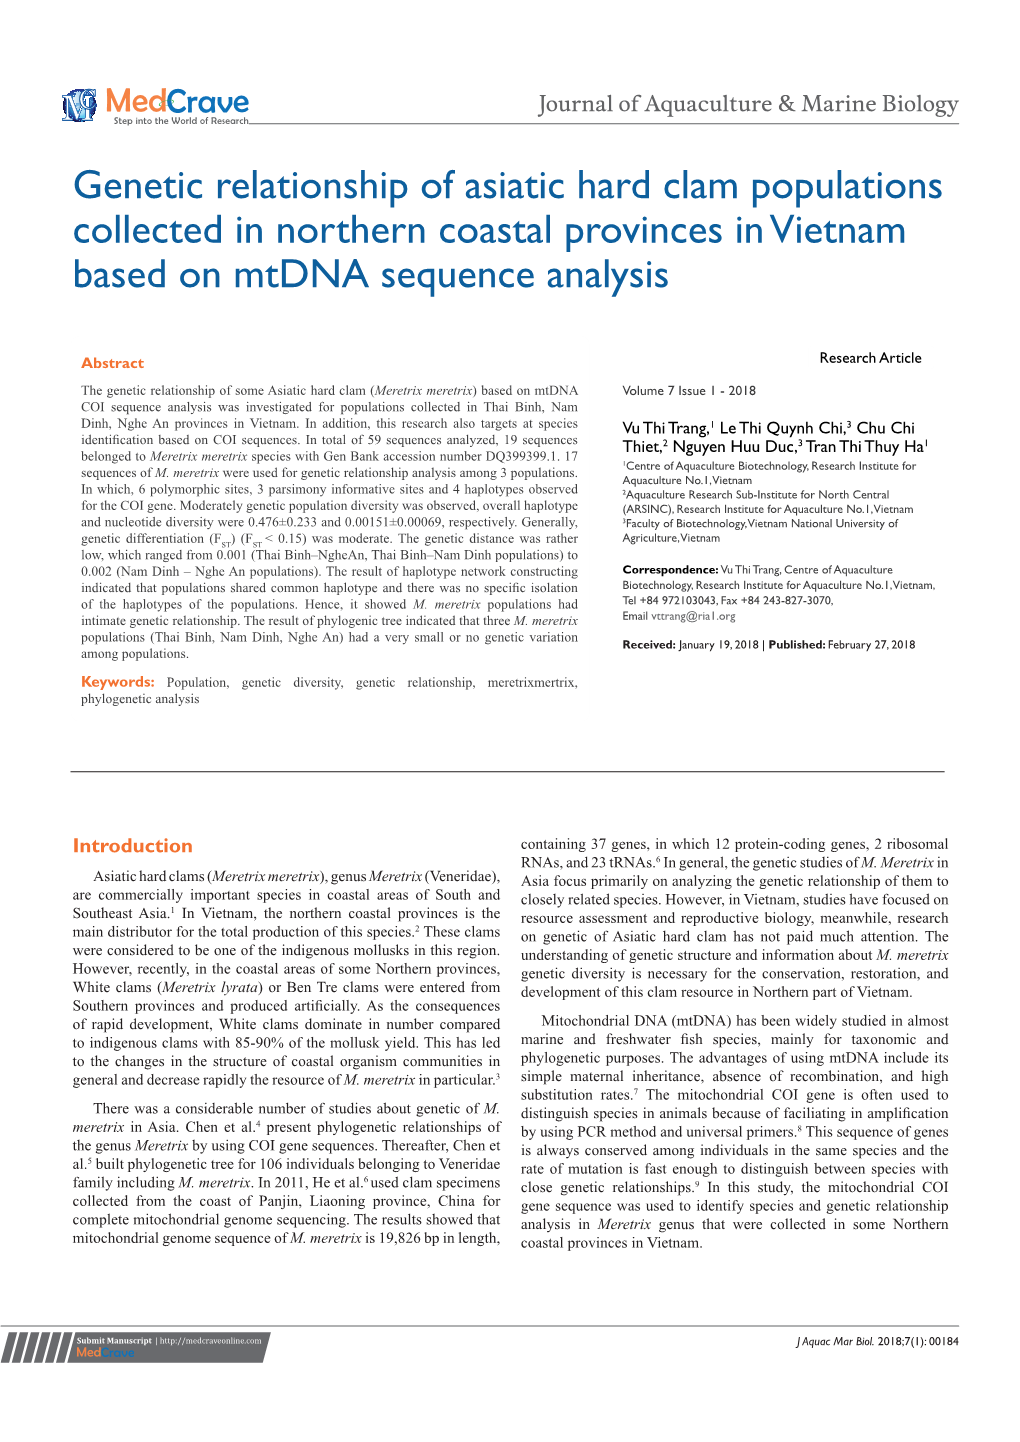 Genetic Relationship of Asiatic Hard Clam Populations Collected in Northern Coastal Provinces in Vietnam Based on Mtdna Sequence Analysis